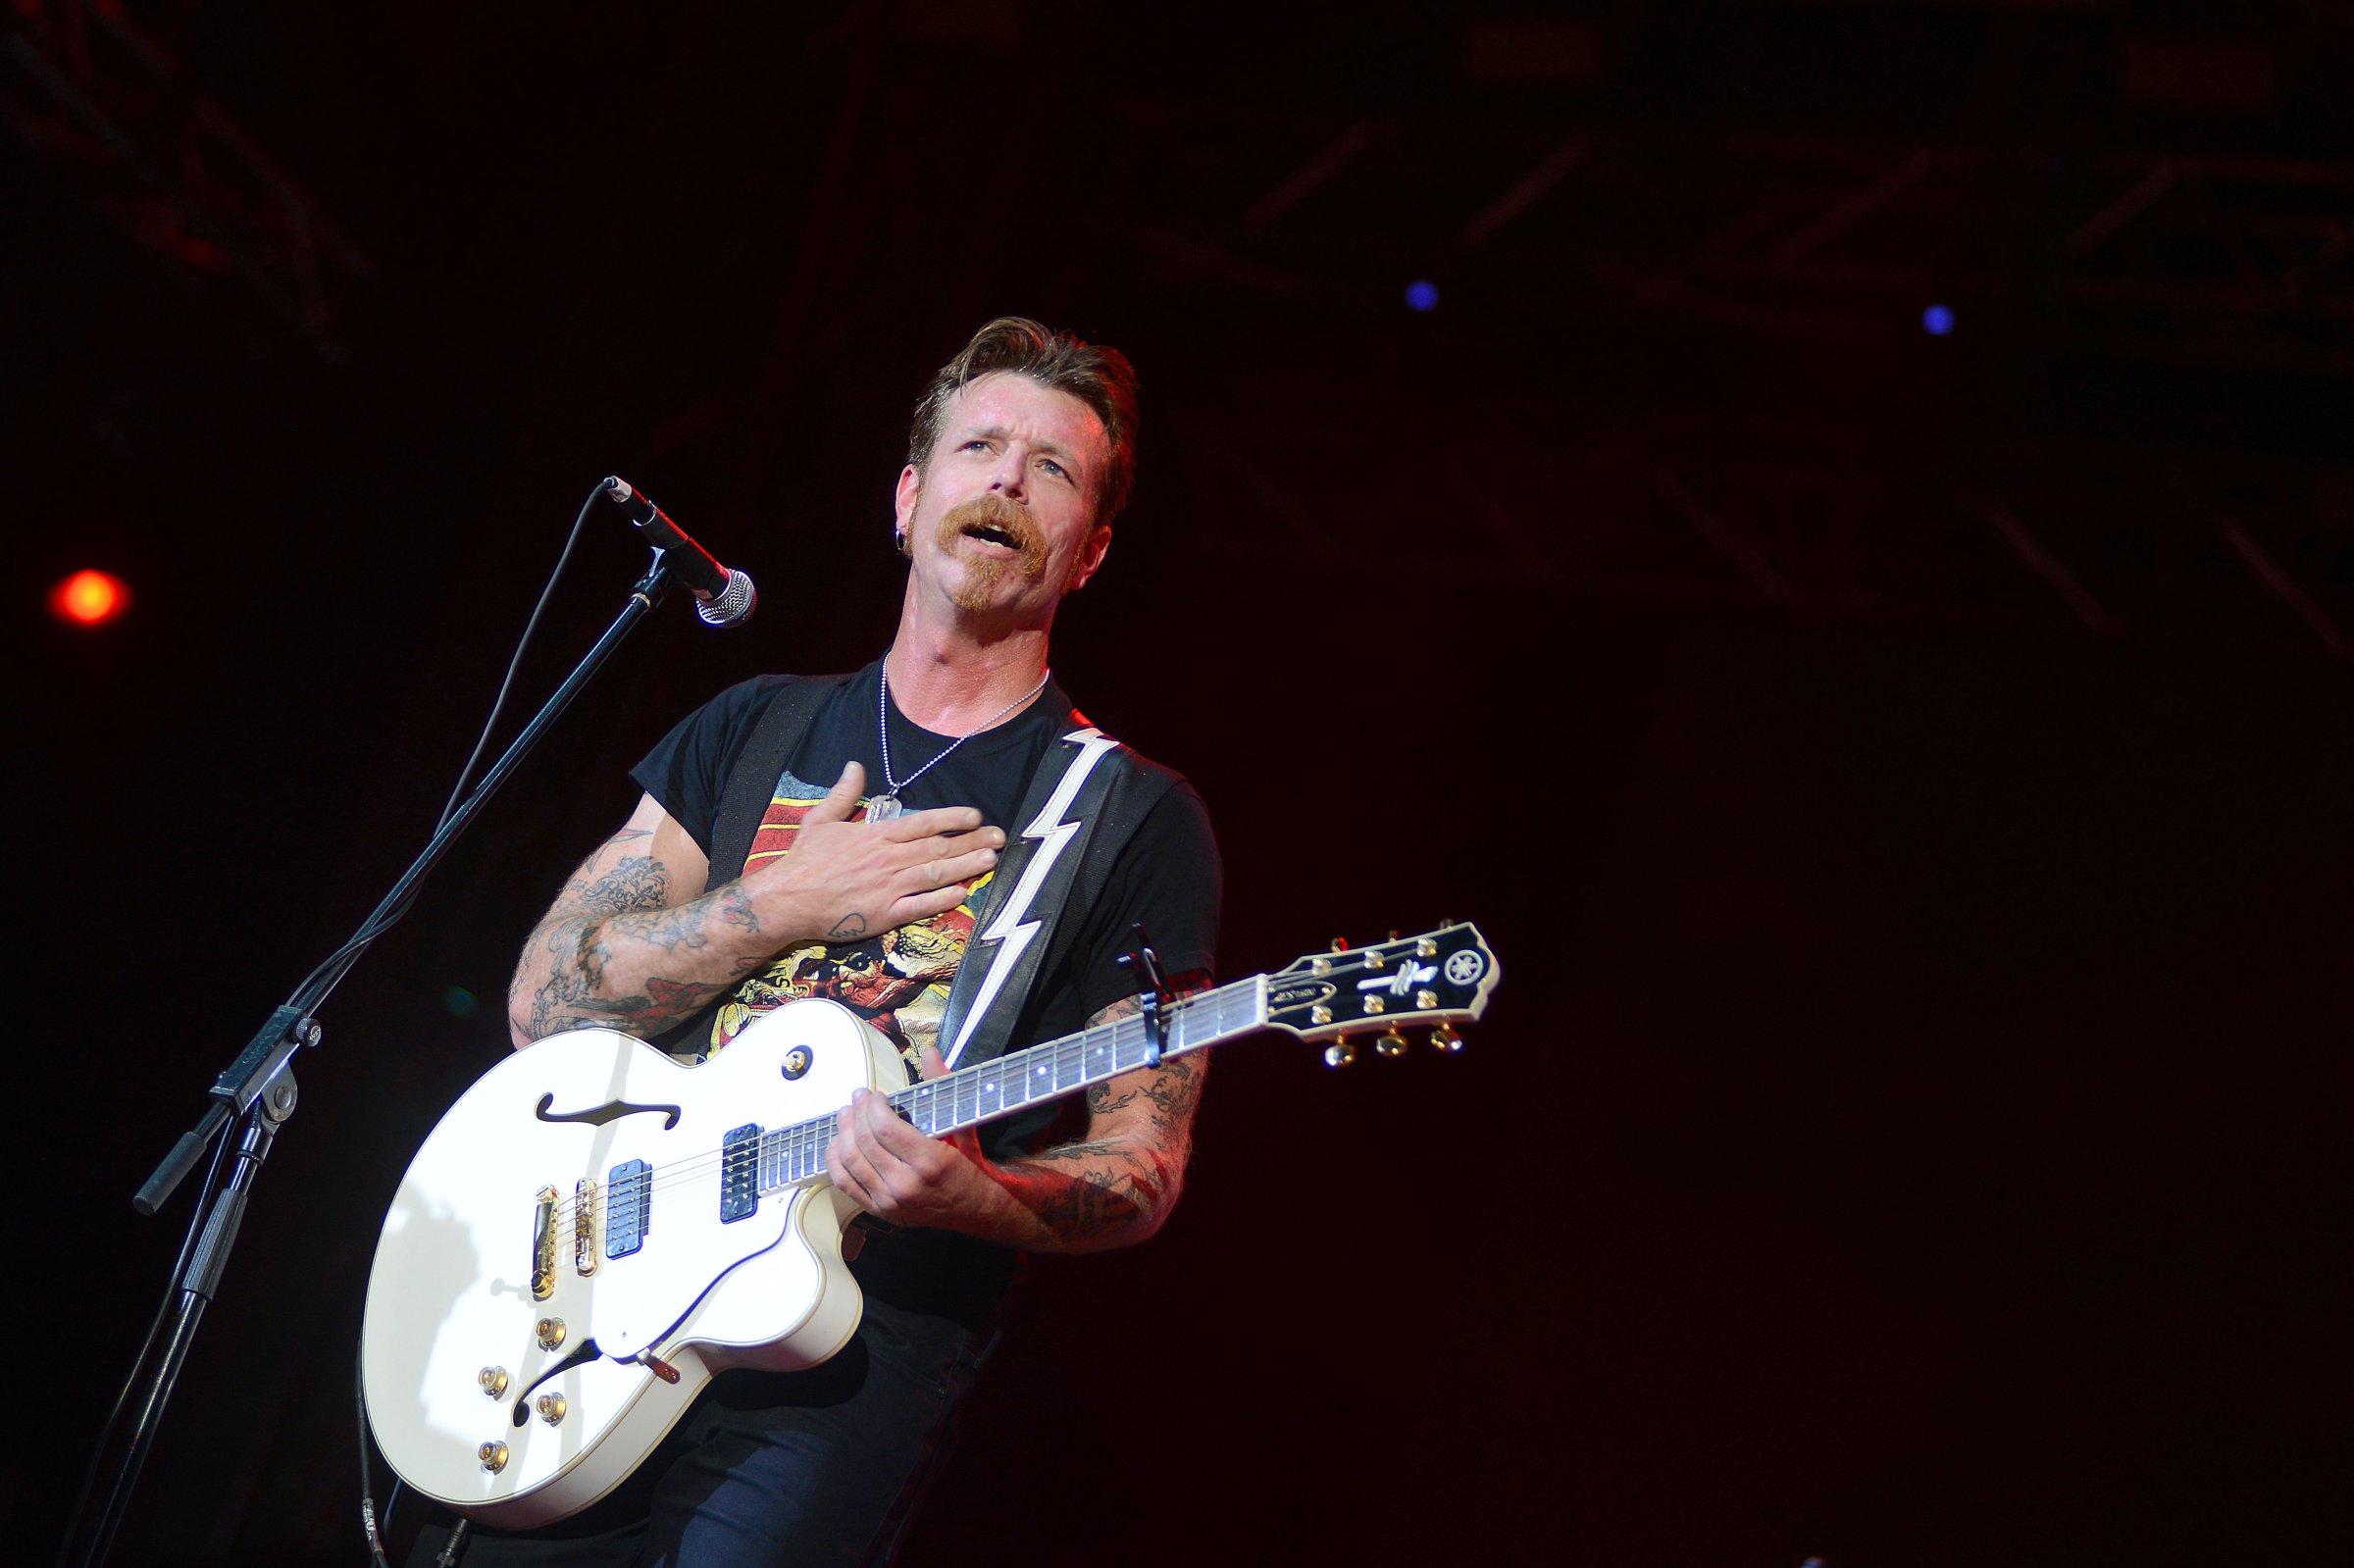 Jesse Hughes of Eagles of Death Metal performs live at Petrovaradin Fortress on July 9, 2015 in Novi Sad, Serbia.